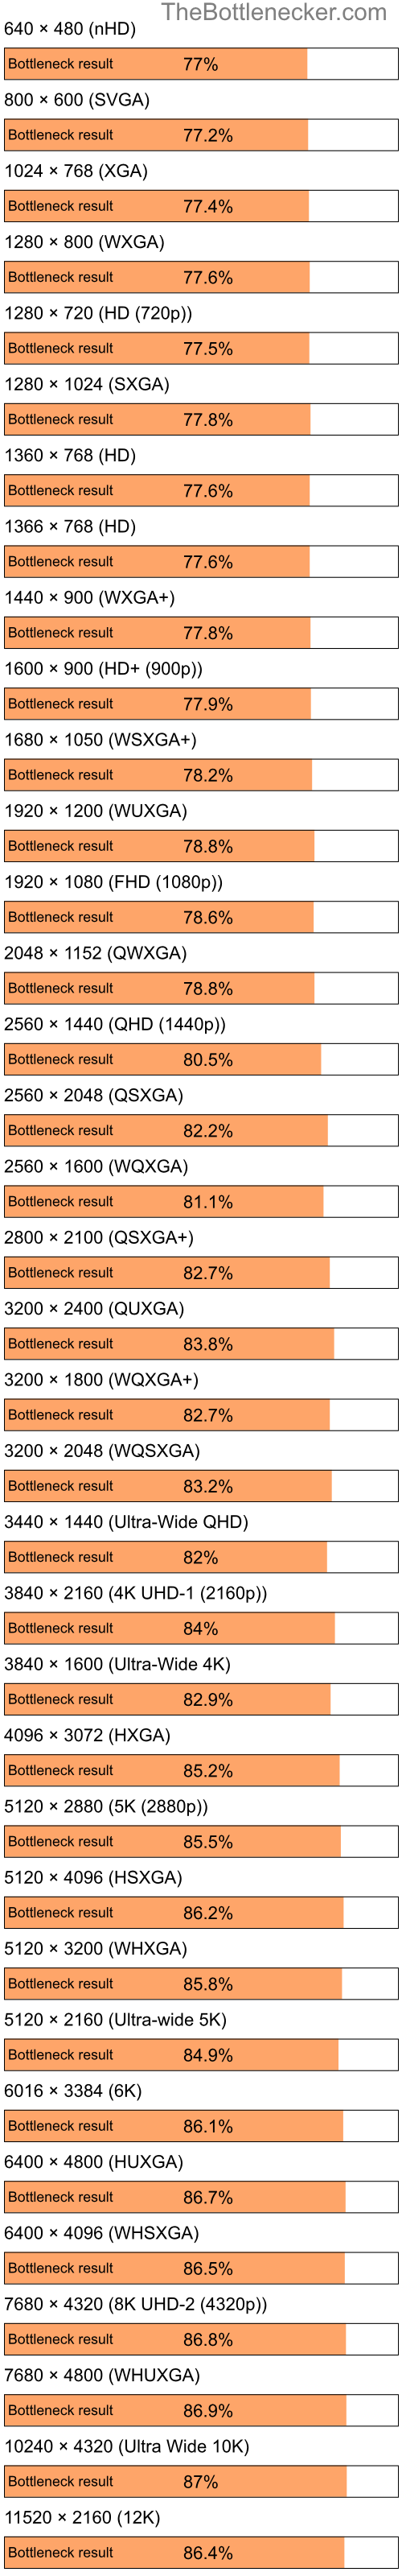 Bottleneck results by resolution for Intel Pentium 4 and AMD Mobility Radeon 9600 in7 Days to Die